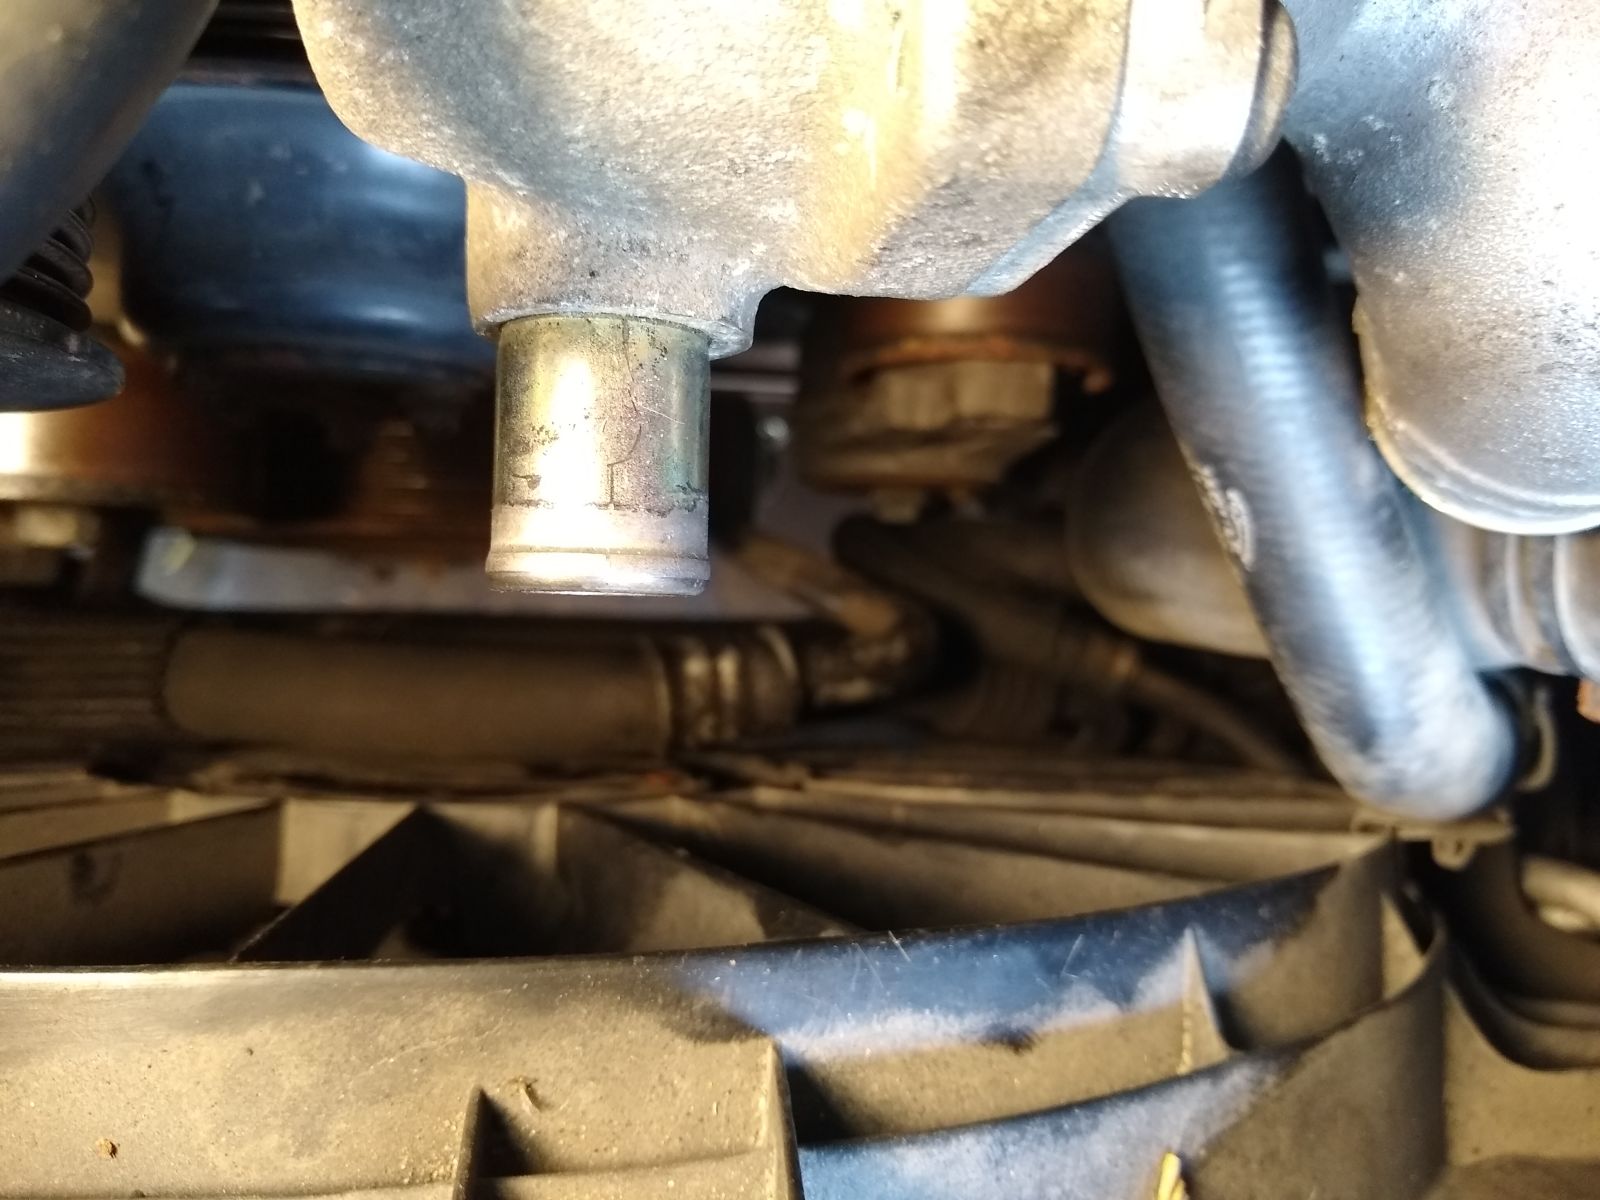 Or it might just be a slow coolant leak?